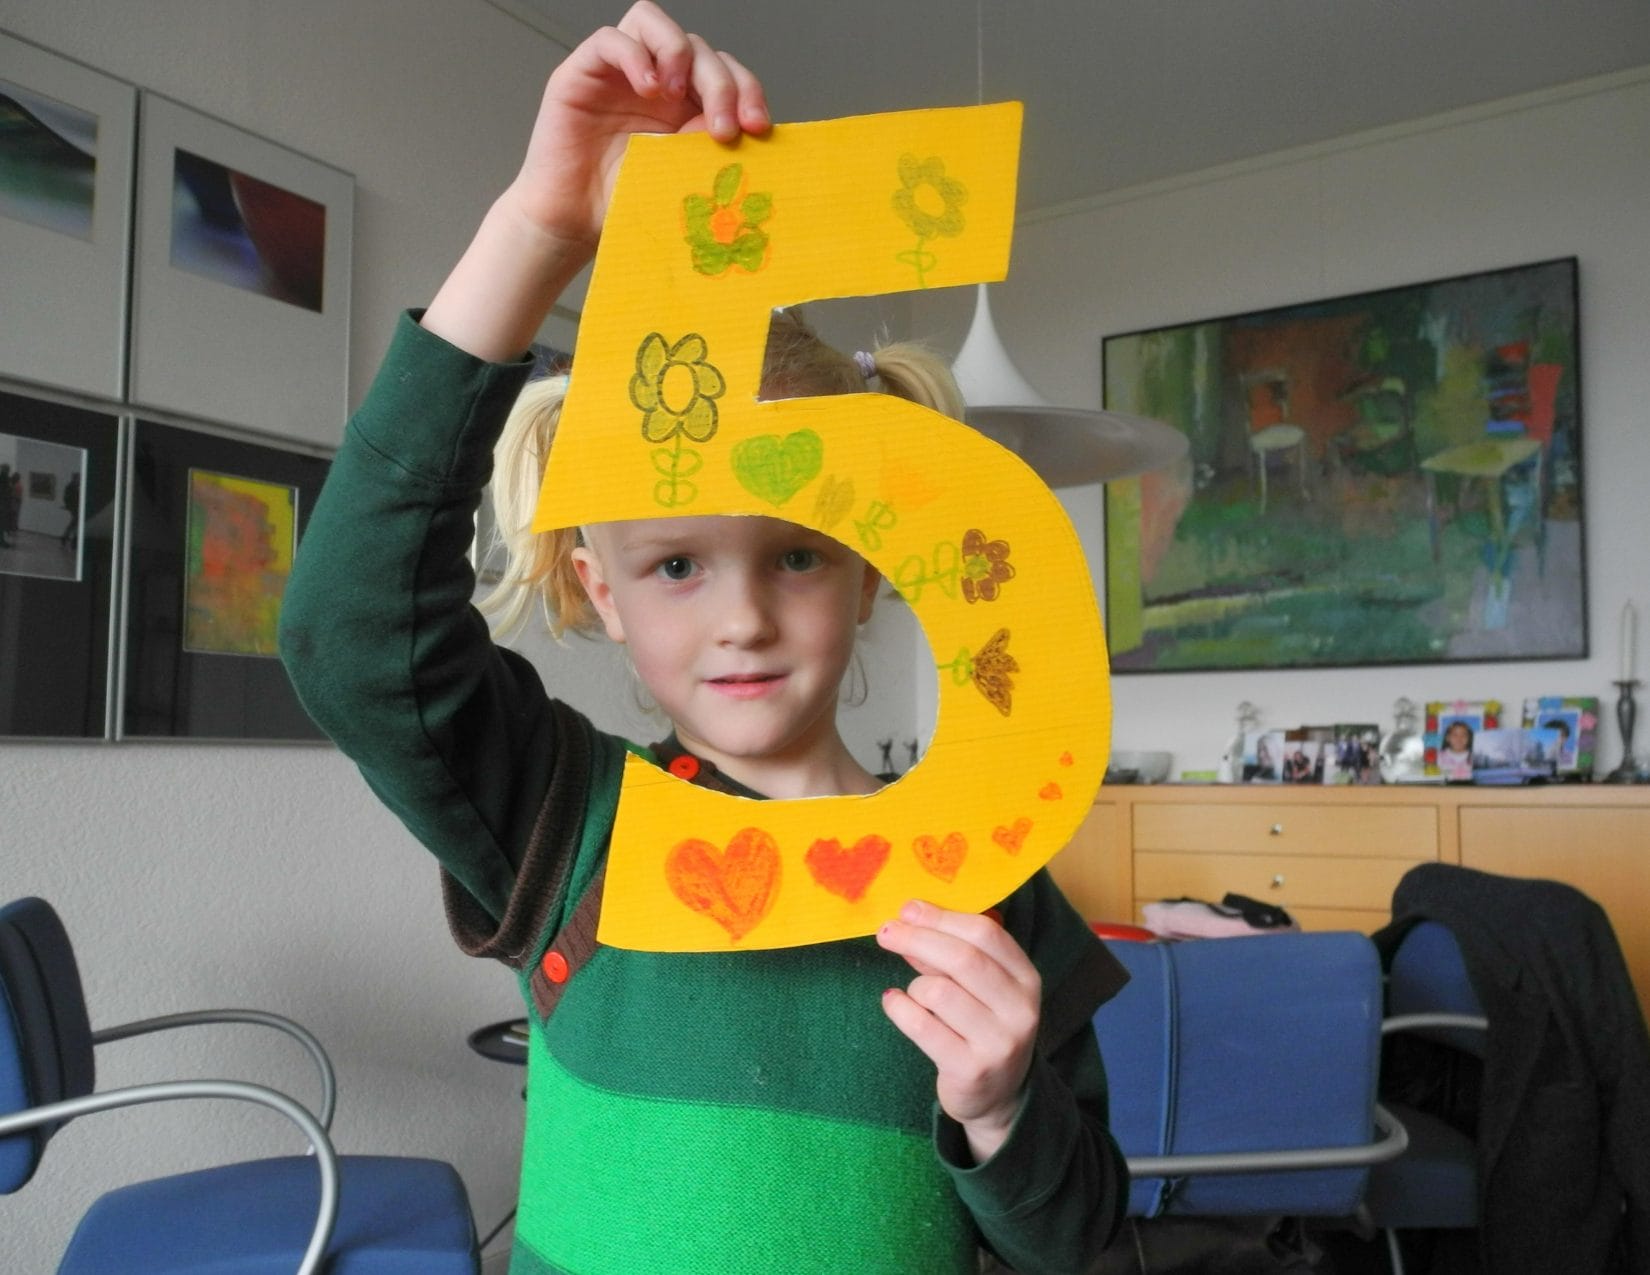 Child holding up a yellow number 5 with drawing on it